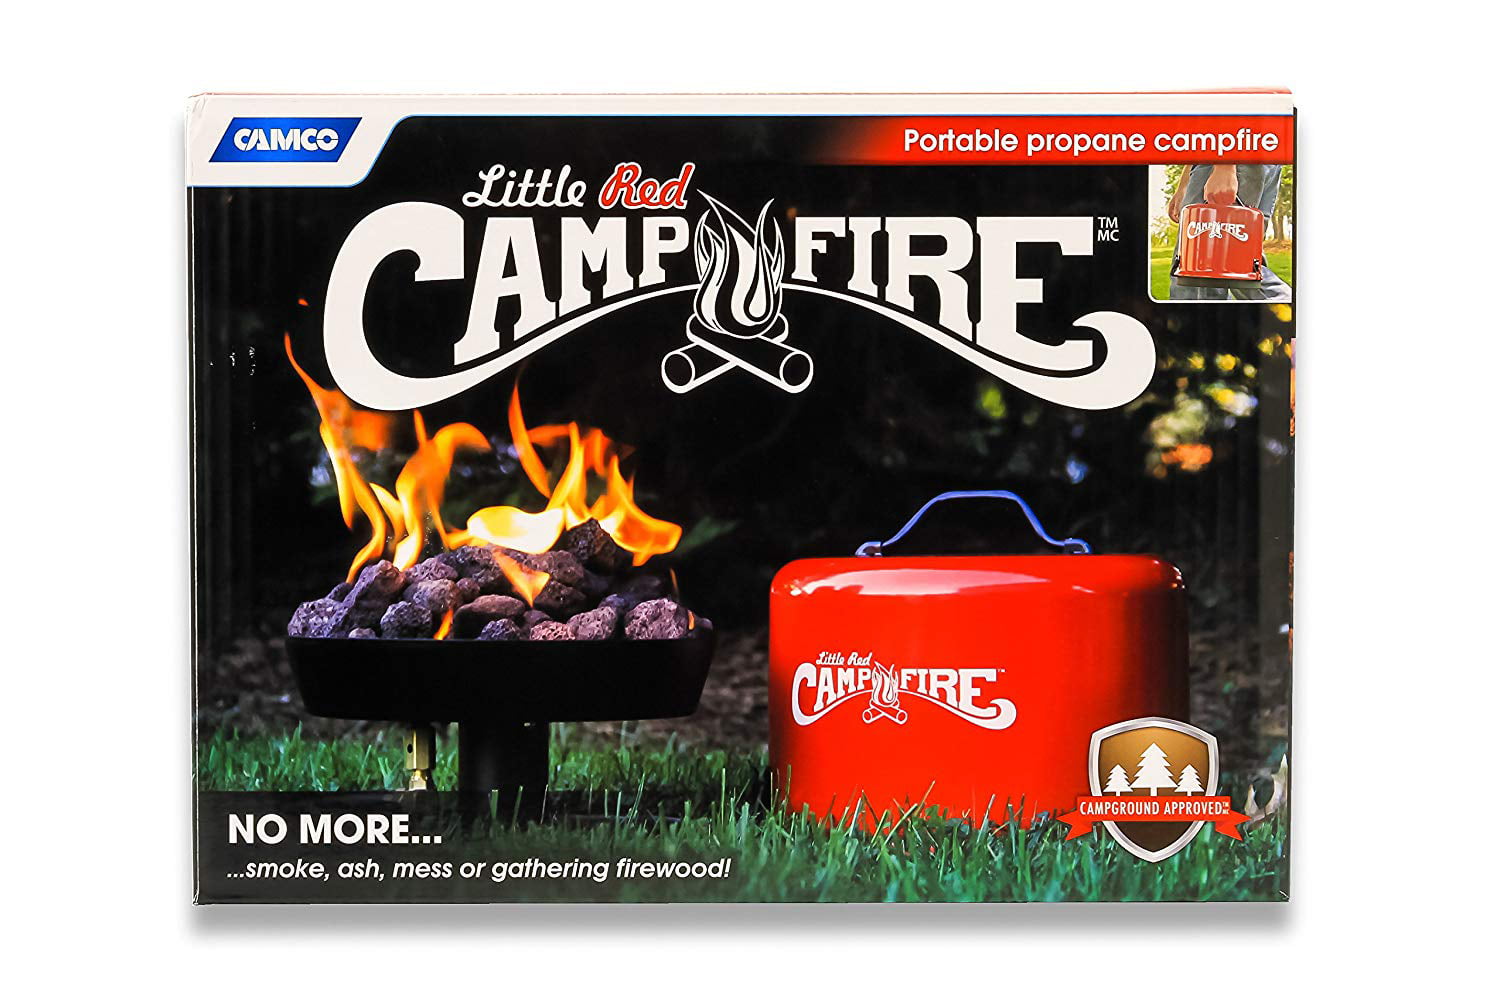 Camco Little Red Campfire 11 25 Inch, Camco Big Red Fire Pit